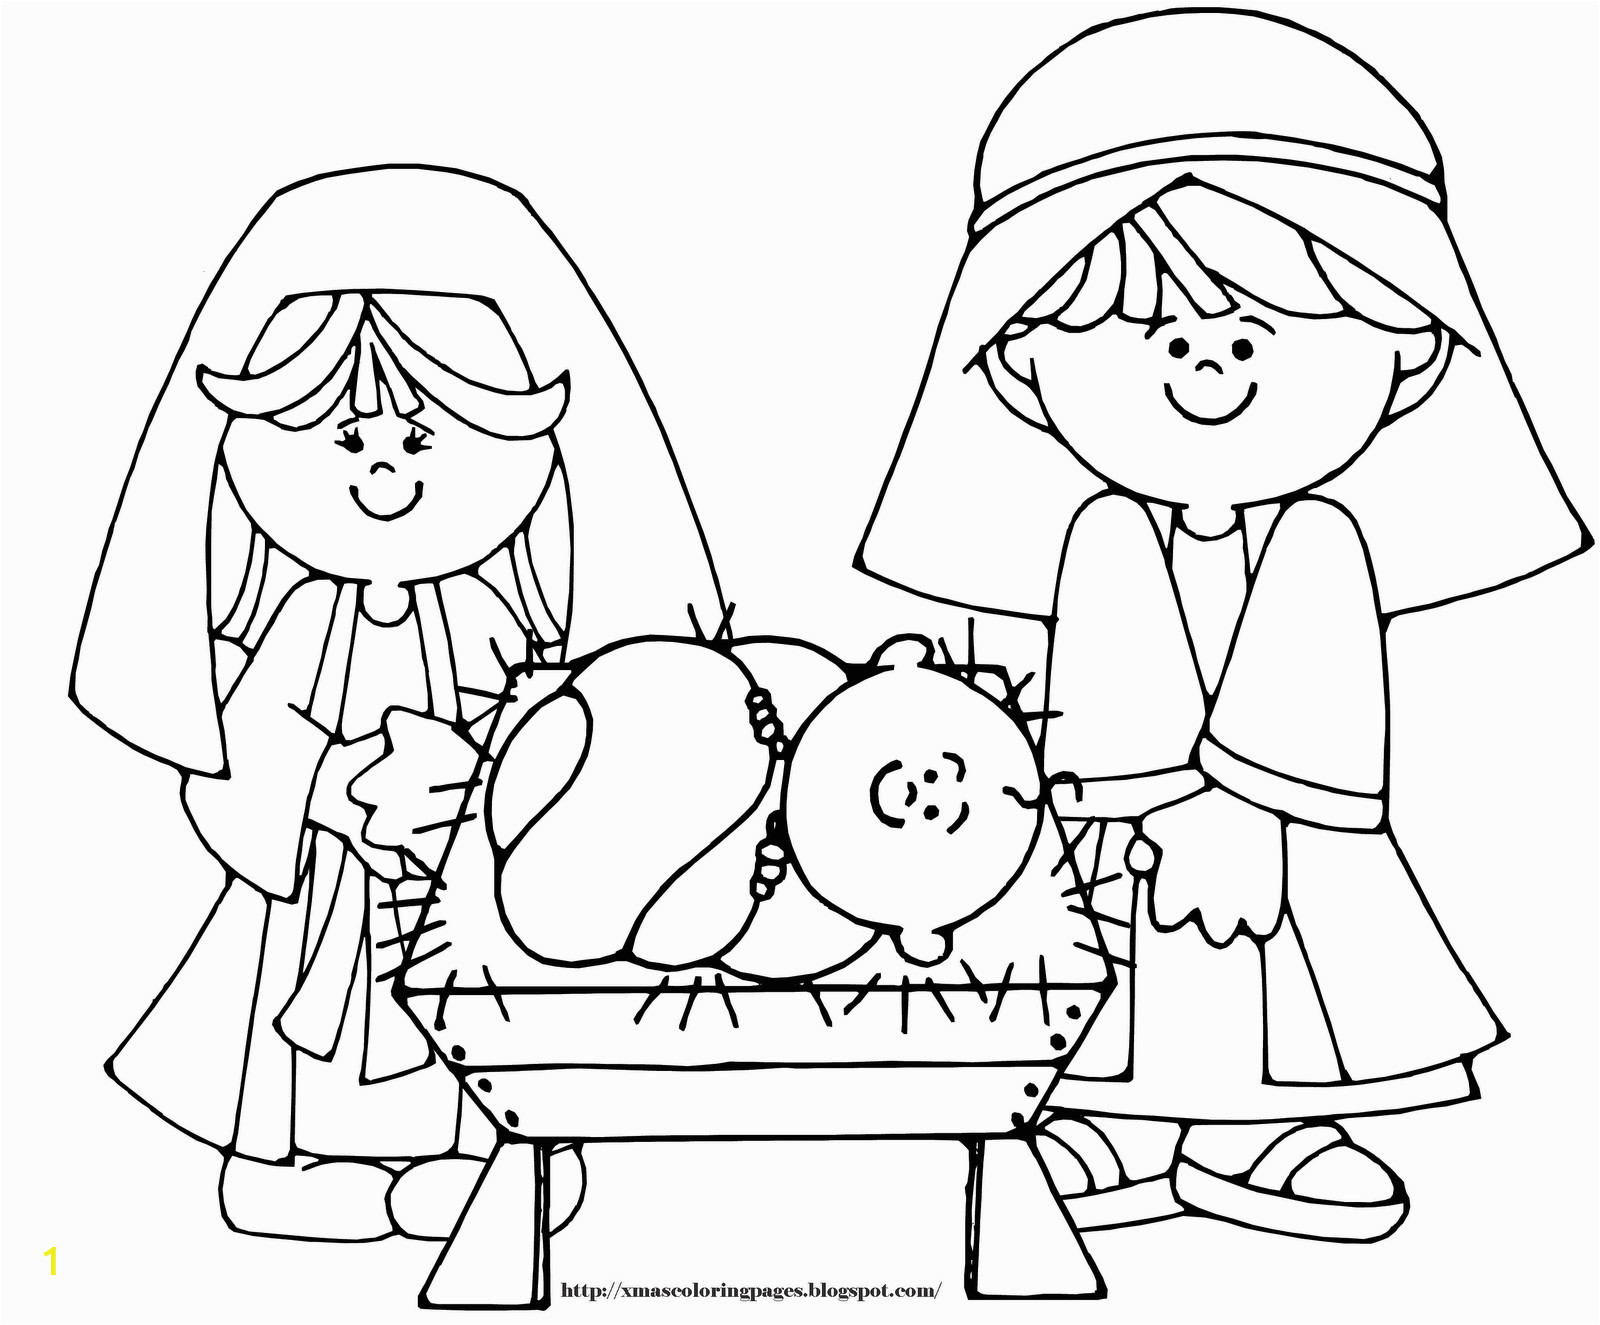 Coloring Page Of Baby Jesus Mary and Joseph Mary and Jesus Coloring Page at Getcolorings